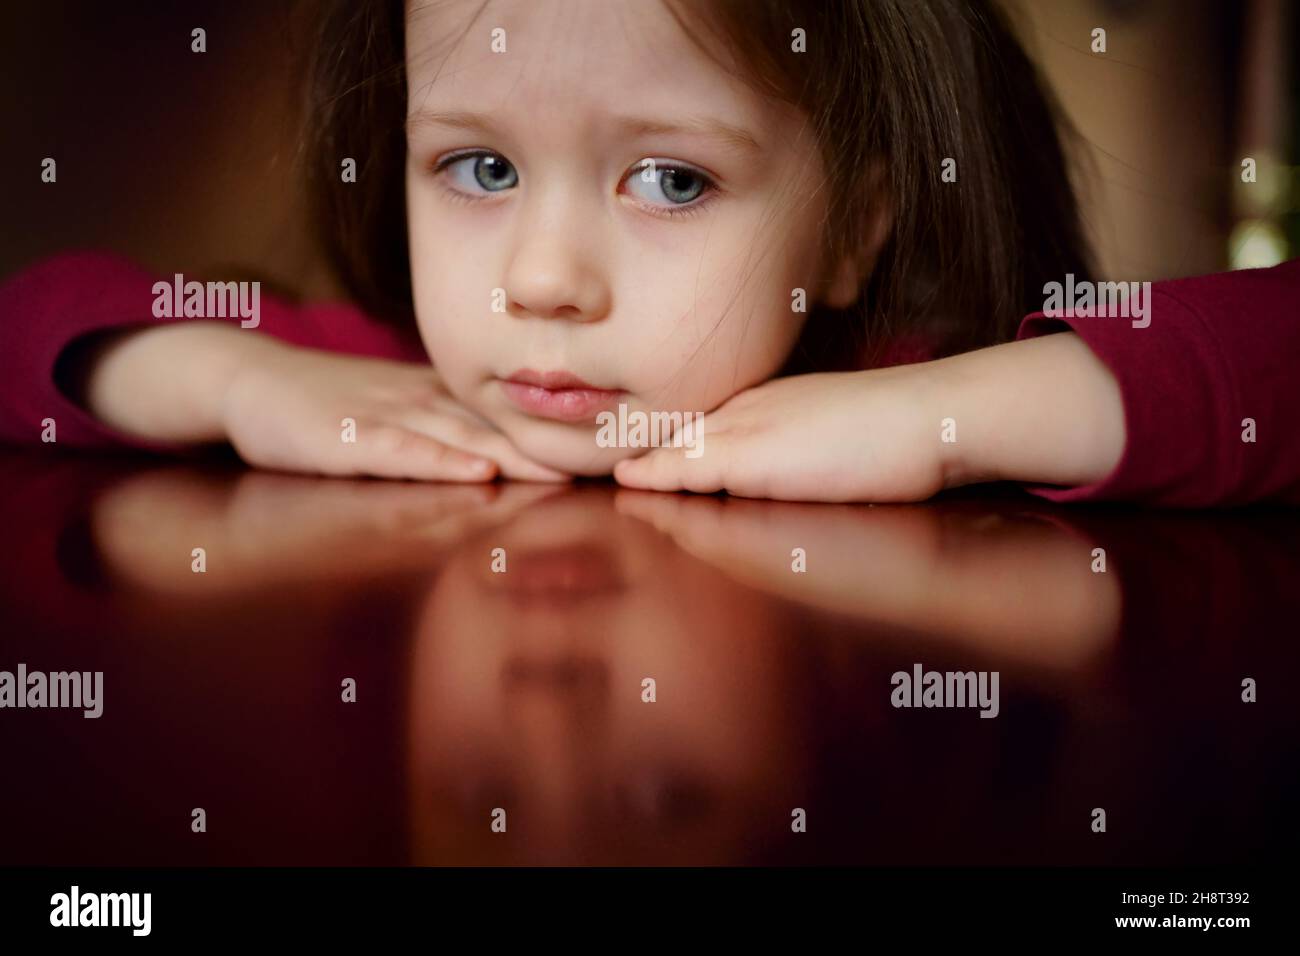 Sad head of a little girl lies on the table, thinks, upset, offended, face reflection Stock Photo